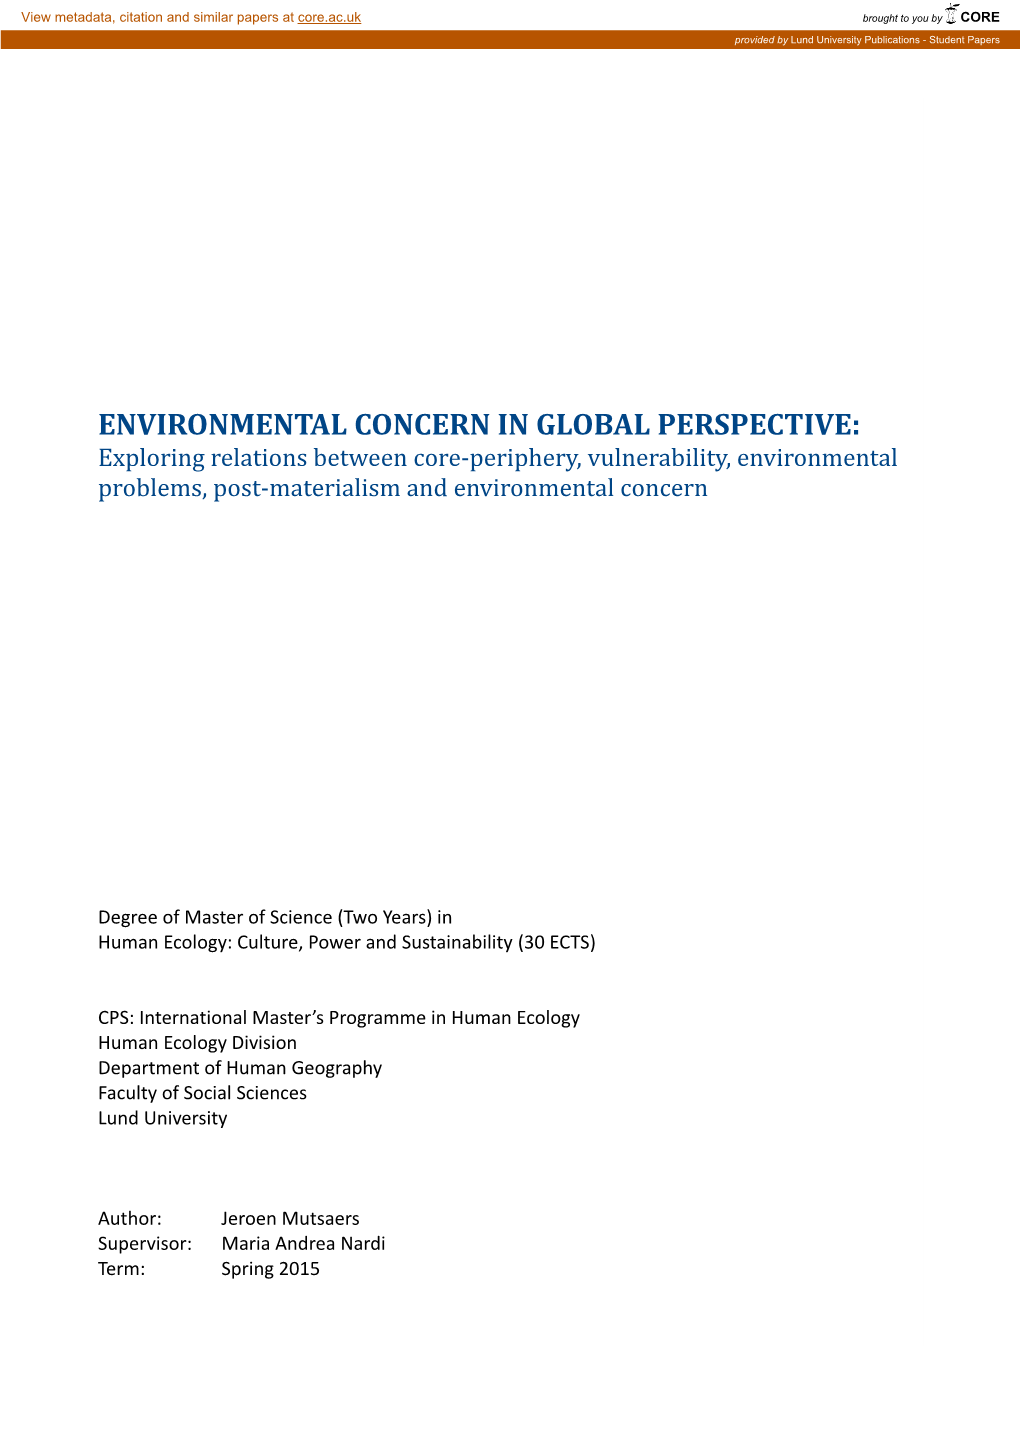 Environmental Concern in Global Perspective: Exploring Relations